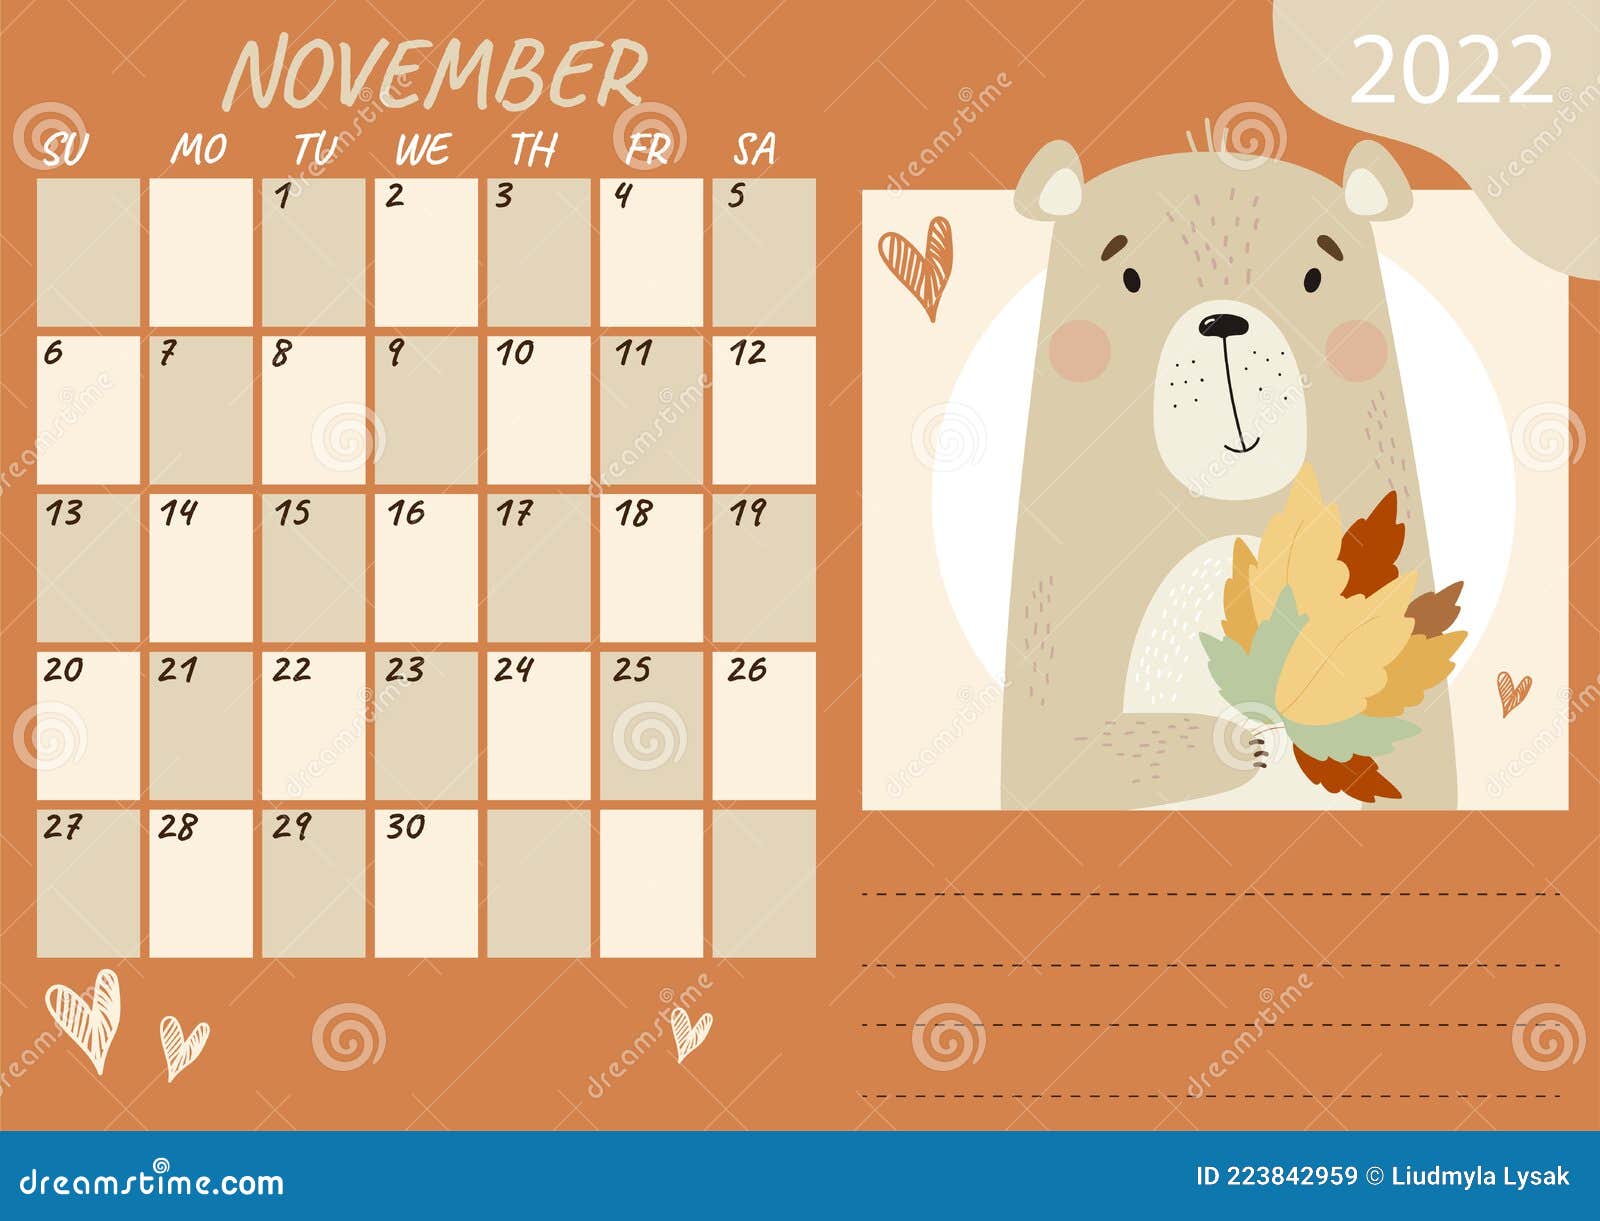 Planner Calendar Template For November 2022 Cute Teddy Bear With A Bouquet Of Autumn Leaves Vector Illustration Week From Stock Vector Illustration Of Kids Collection 223842959